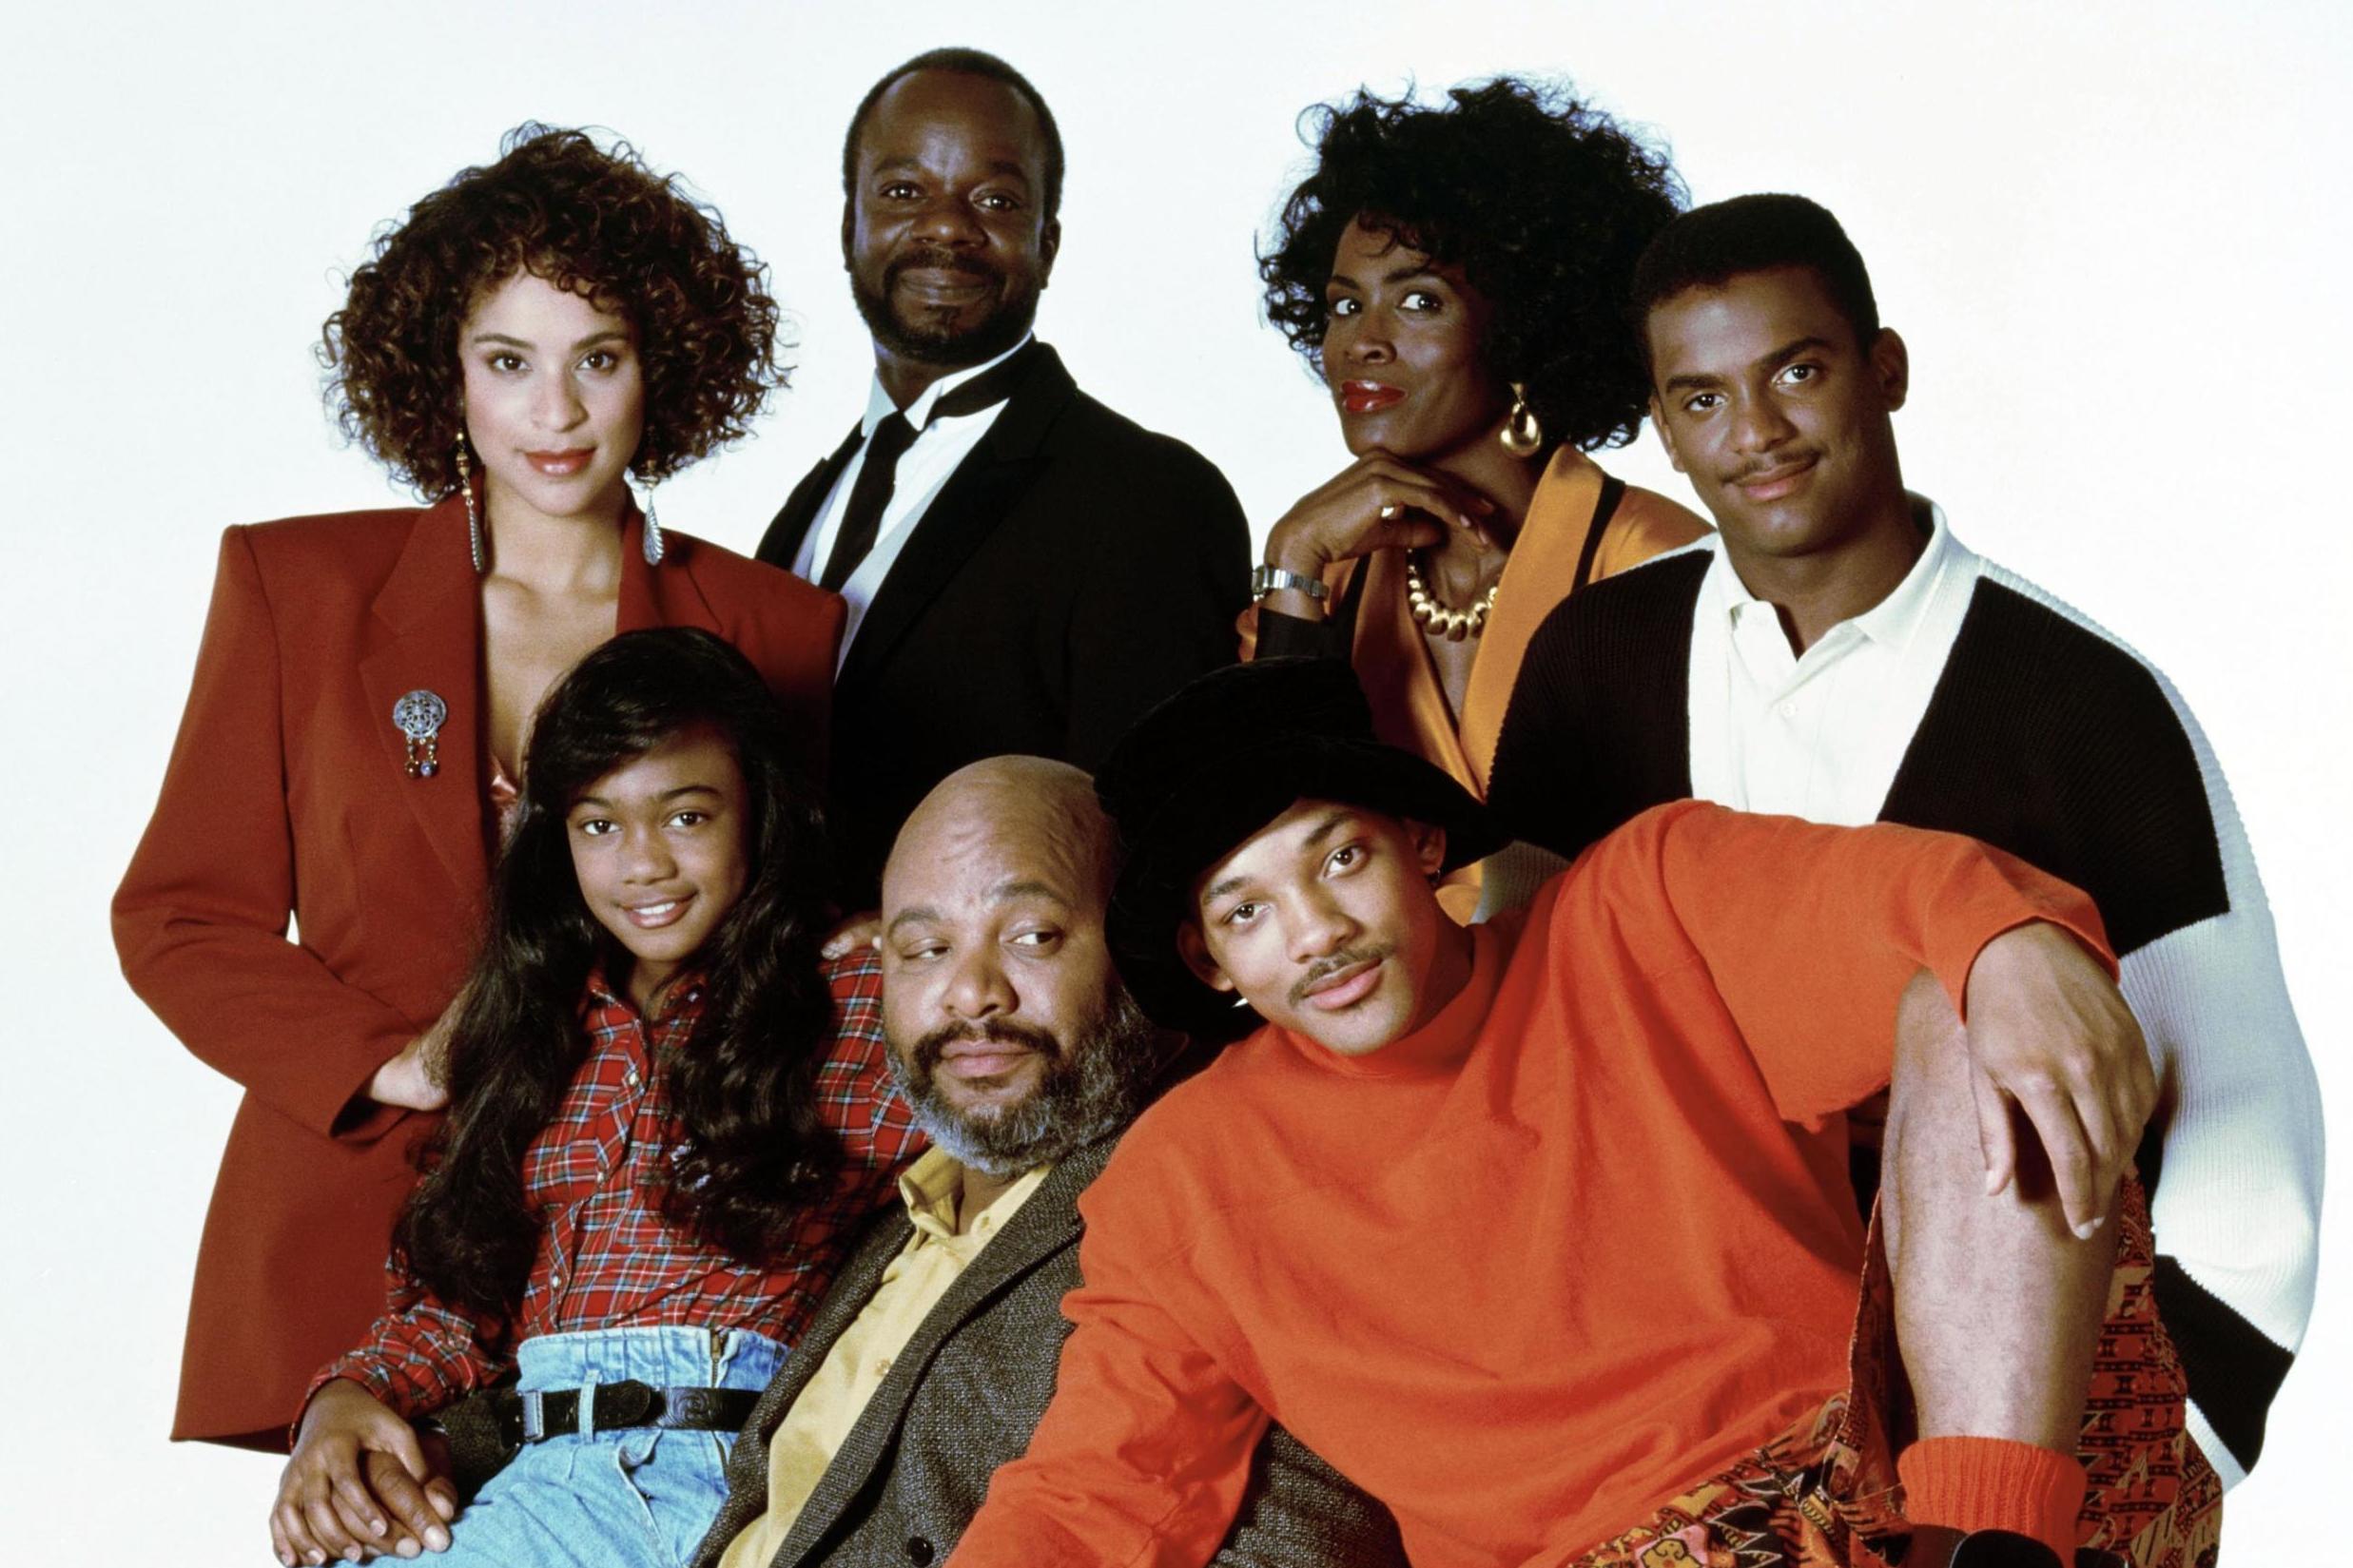 Karyn Parsons, Joseph Marcell, Janet Hubert, Alfonso Ribeiro, Tatyana Ali, James Avery, and Will Smith in a promo shot for ‘The Fresh Prince of Bel-Air’.